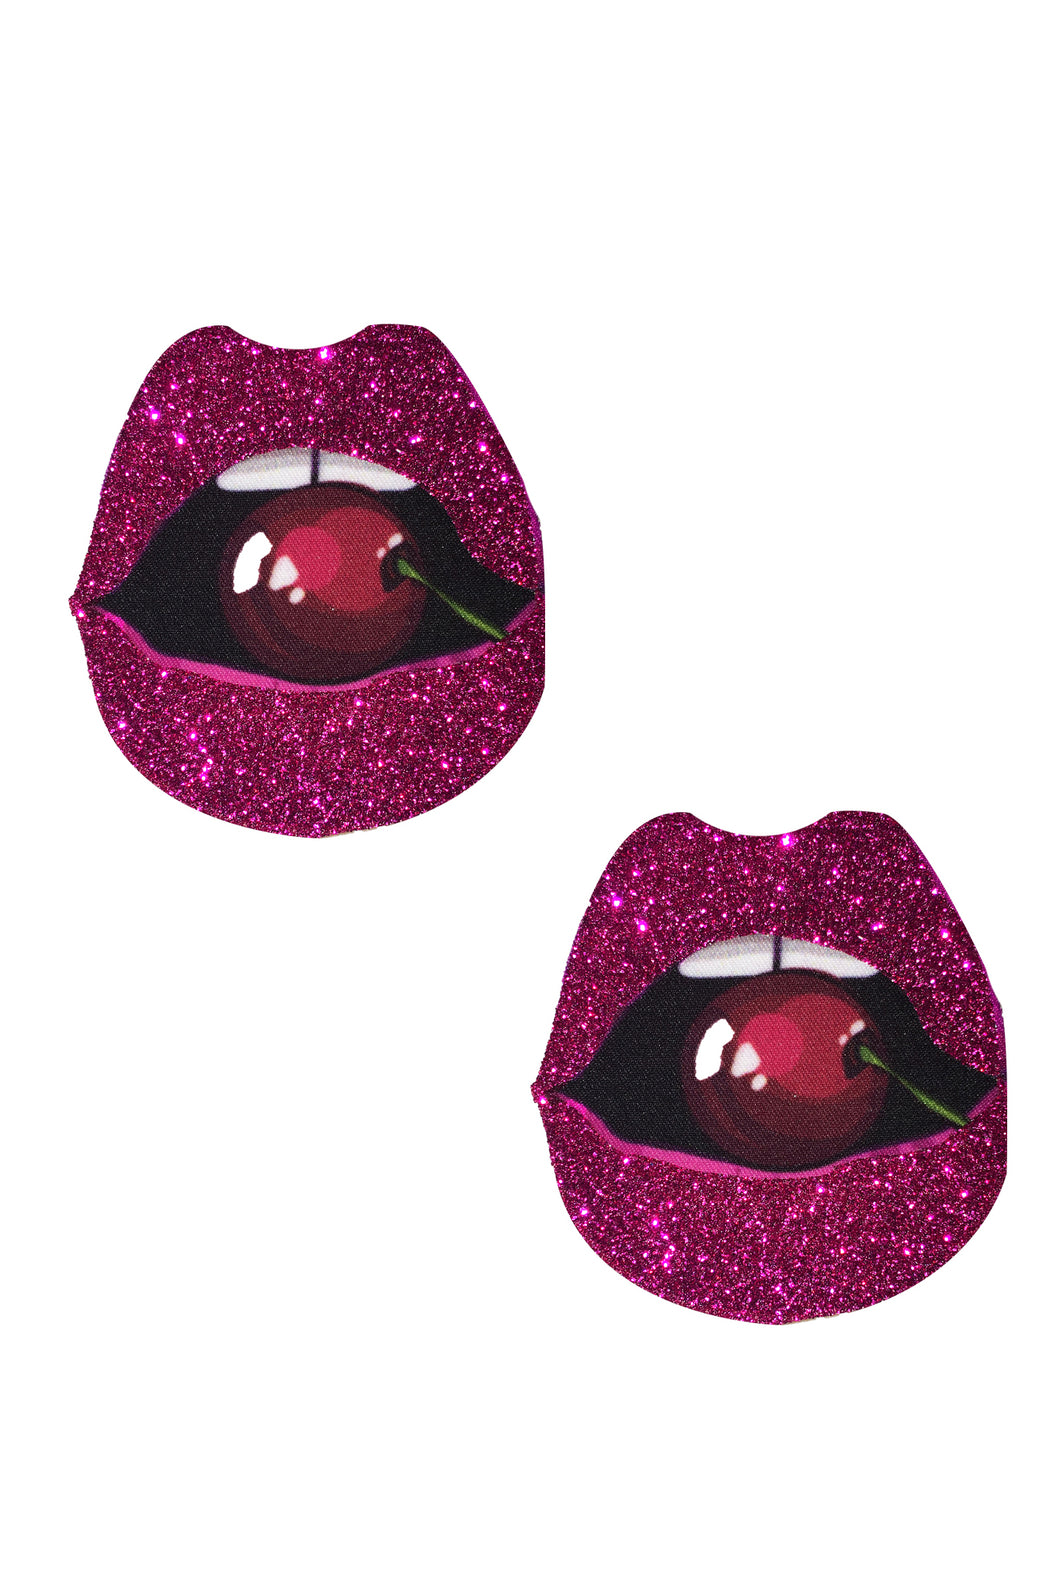 Awesome Poppin' Cherries Pink Glitter Lip Pasties